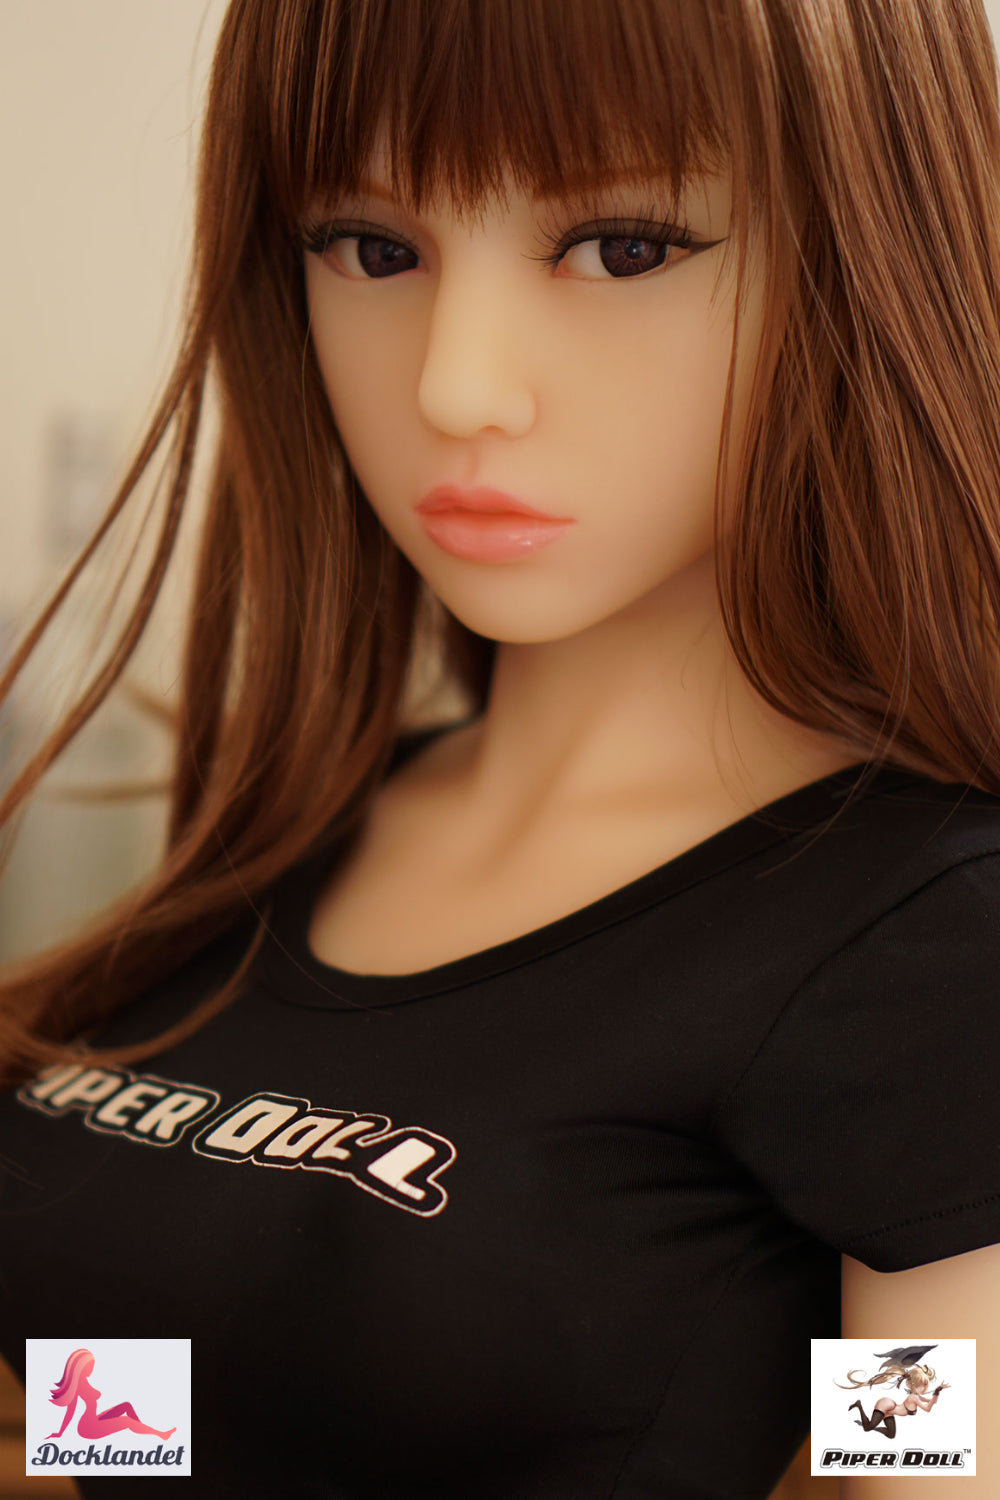 Phoebe (Piper Doll 130 cm D-Cup (TPE)